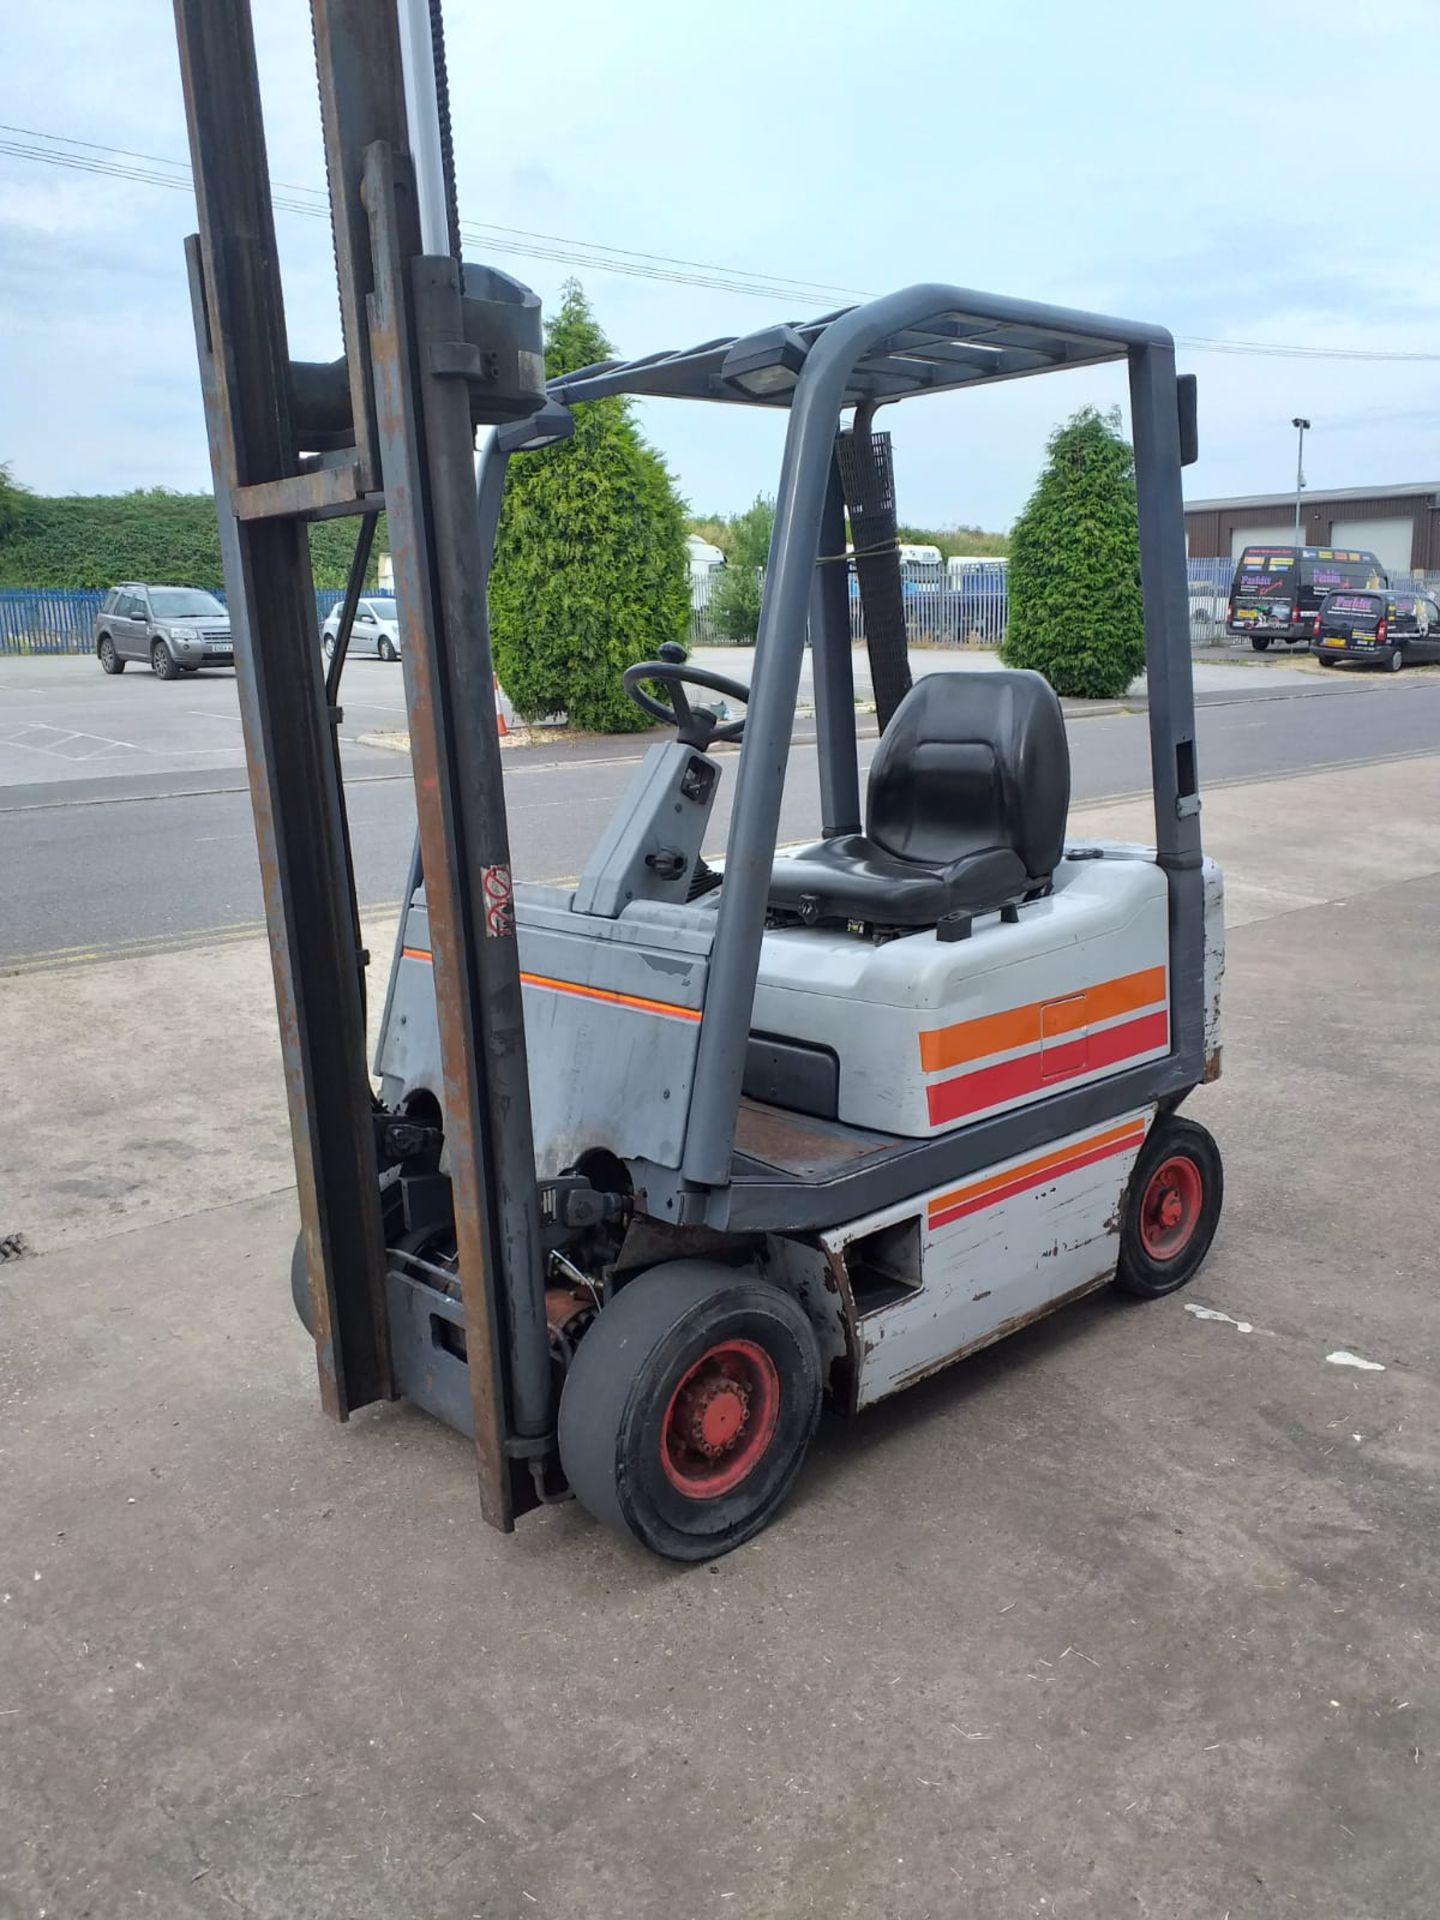 1995 FIAT D15 DIESEL 1.5 TON FORKLIFT DUPLEX MAST WITH SIDE SHIFT, RUNS, WORKS AND LIFTS *NO VAT*